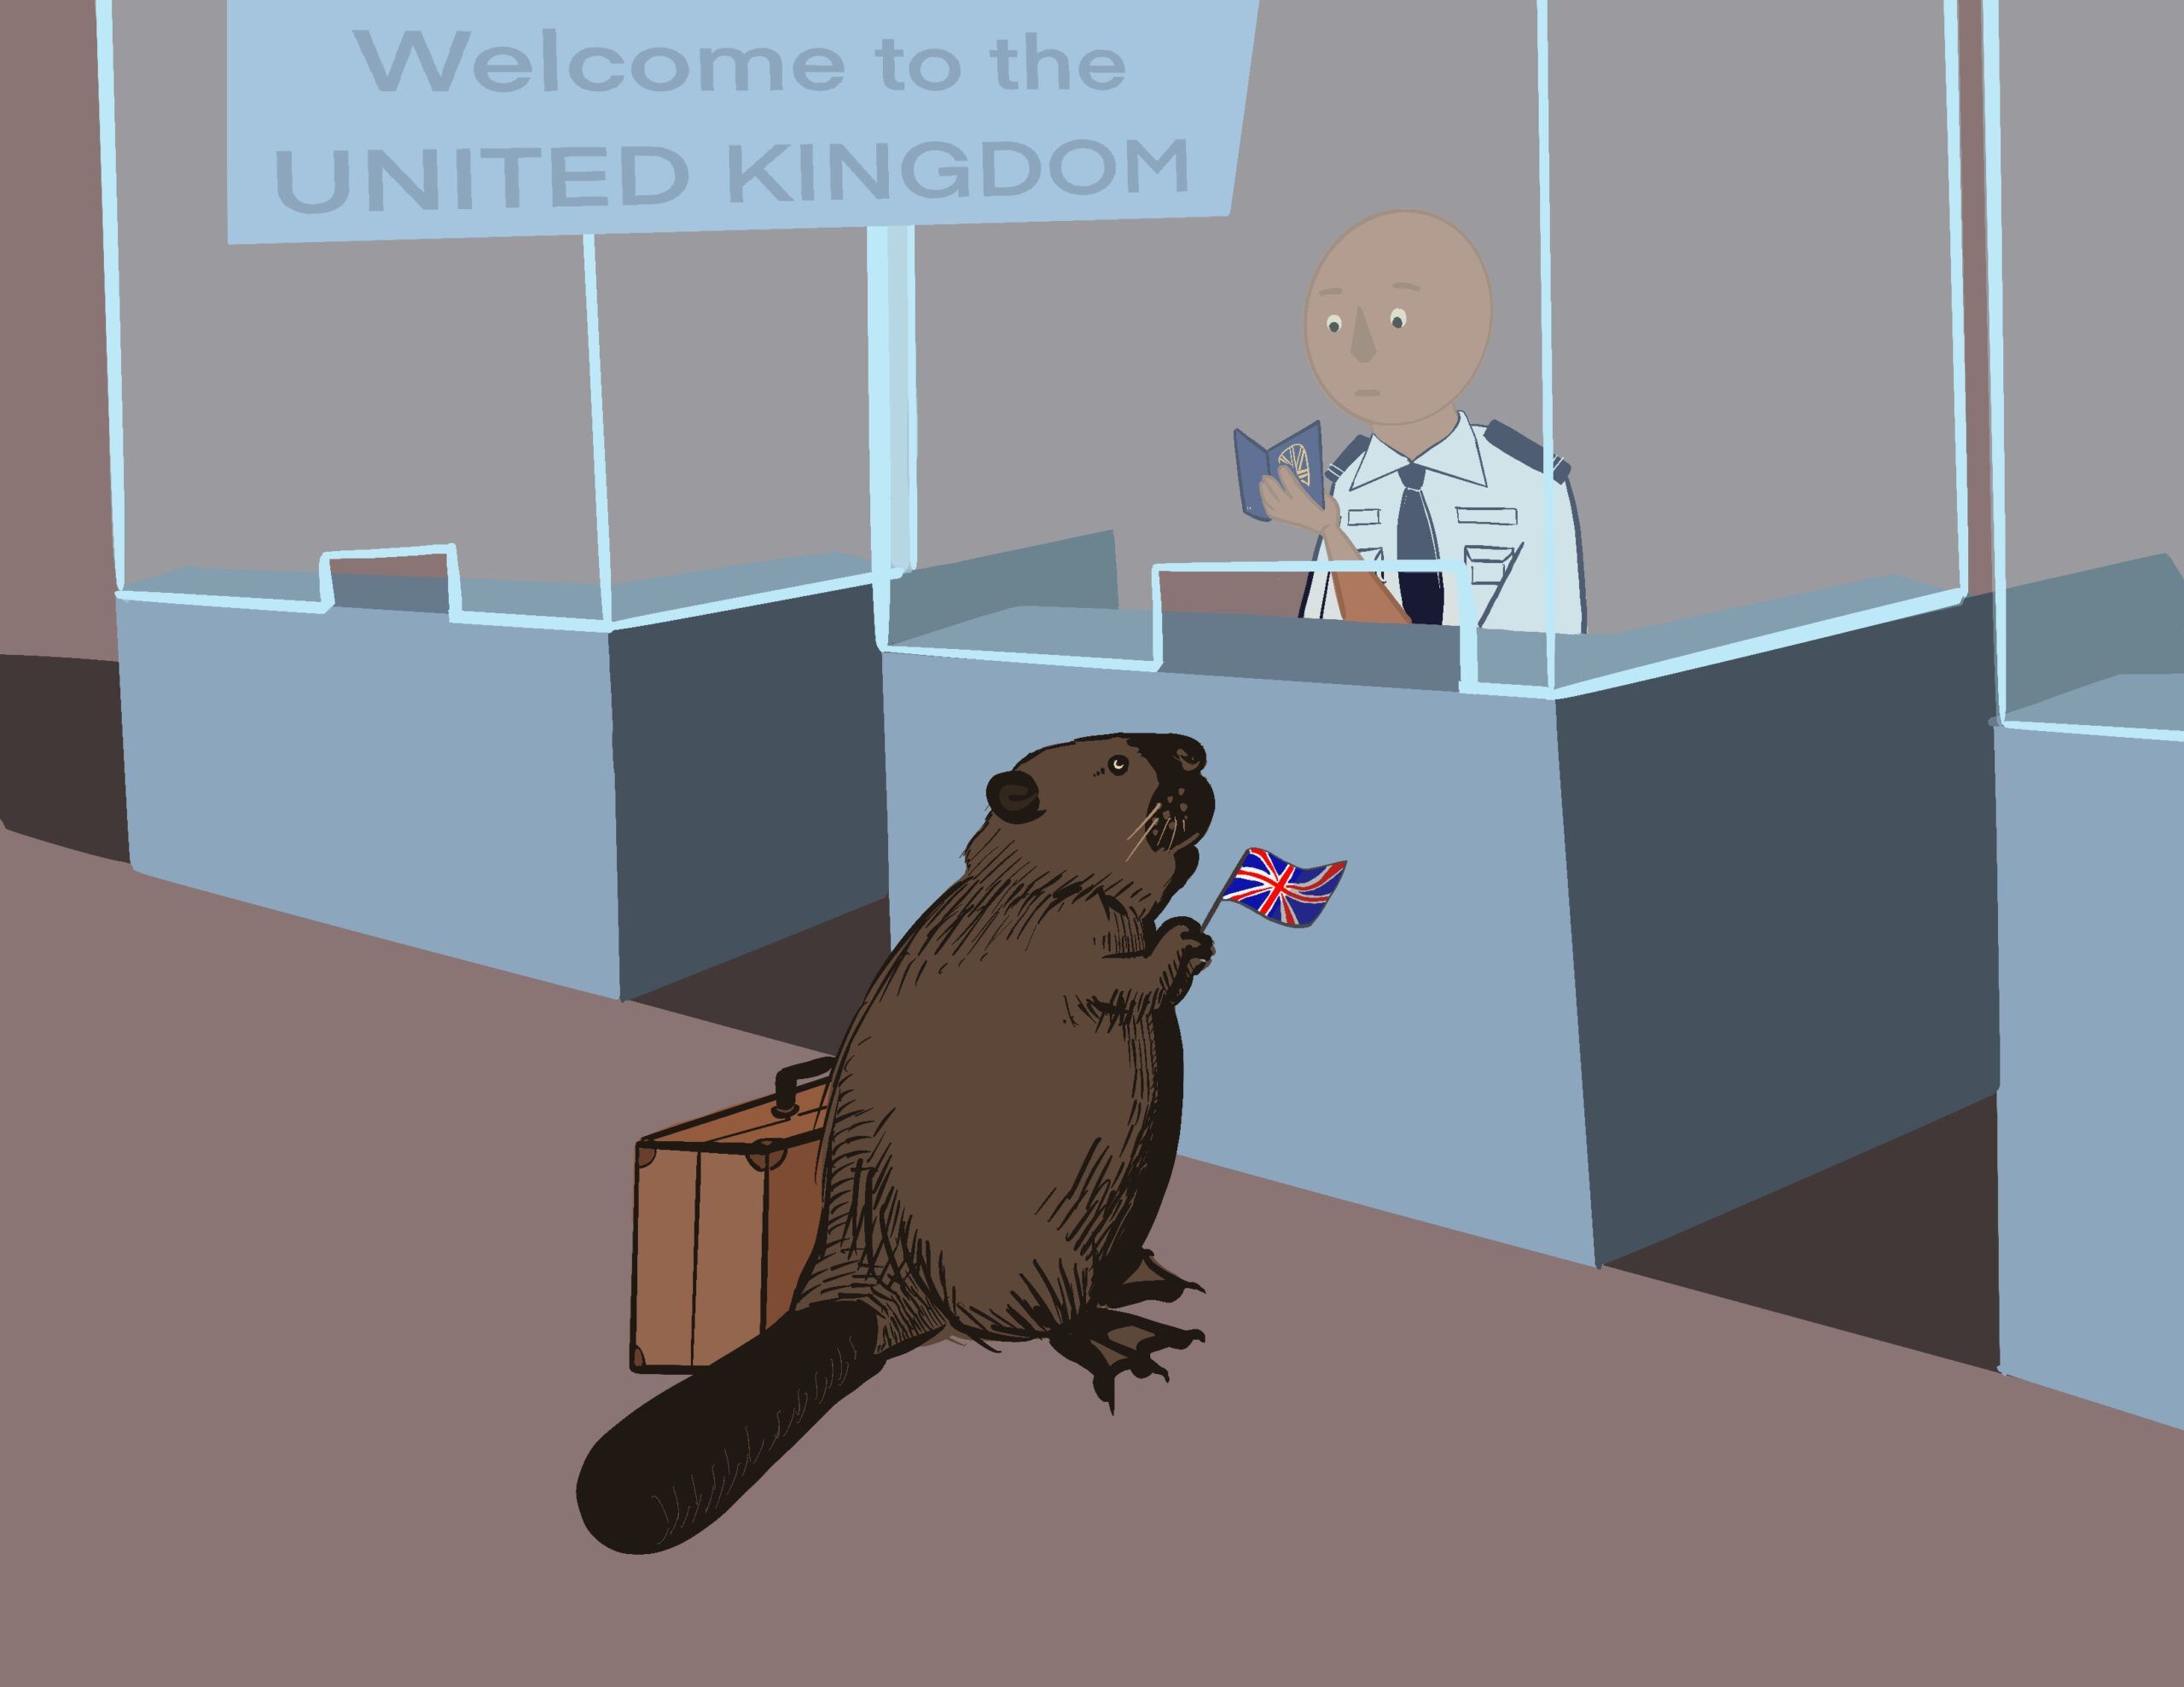 Beavers are back in the UK